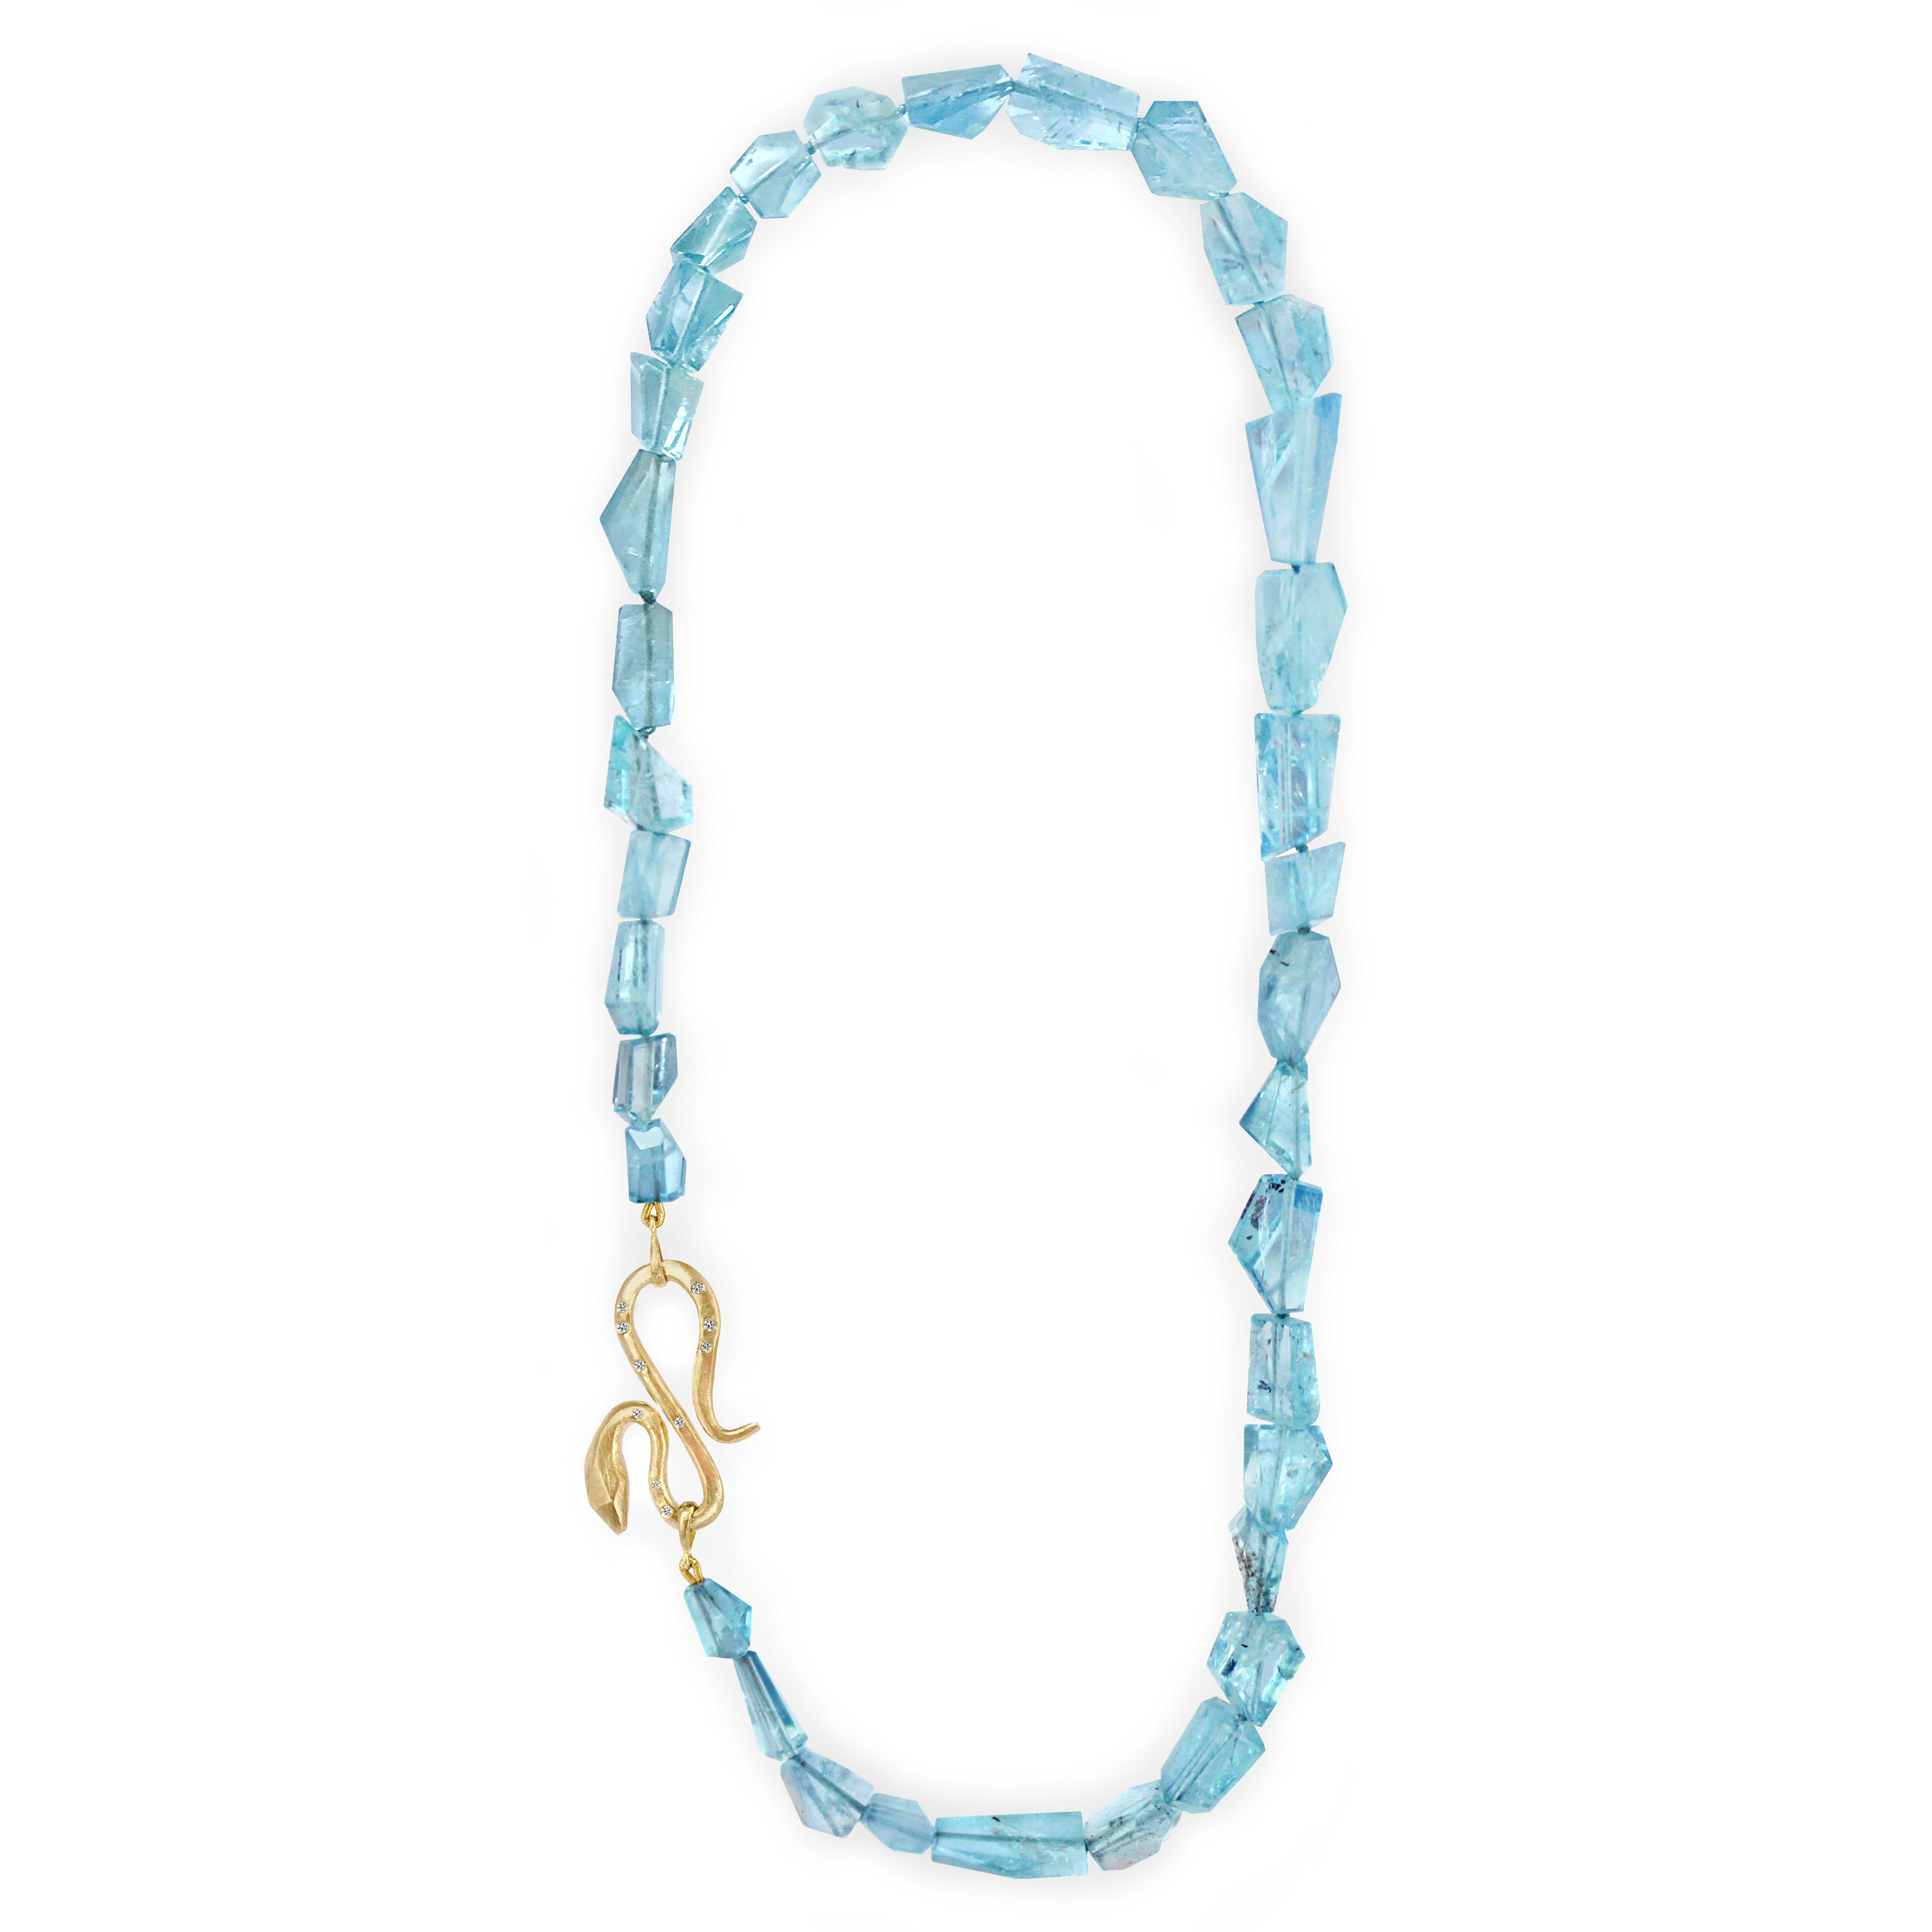 Our one-of-a-kind award winning Amphitrite Snake Necklace is named after the Ocean Goddess Amphitrite, who in Greek legends was forced into marriage with Poseidon. Our 18kt FAIRMINED yellow gold, Aquamarine and Diamond necklace received the 2019